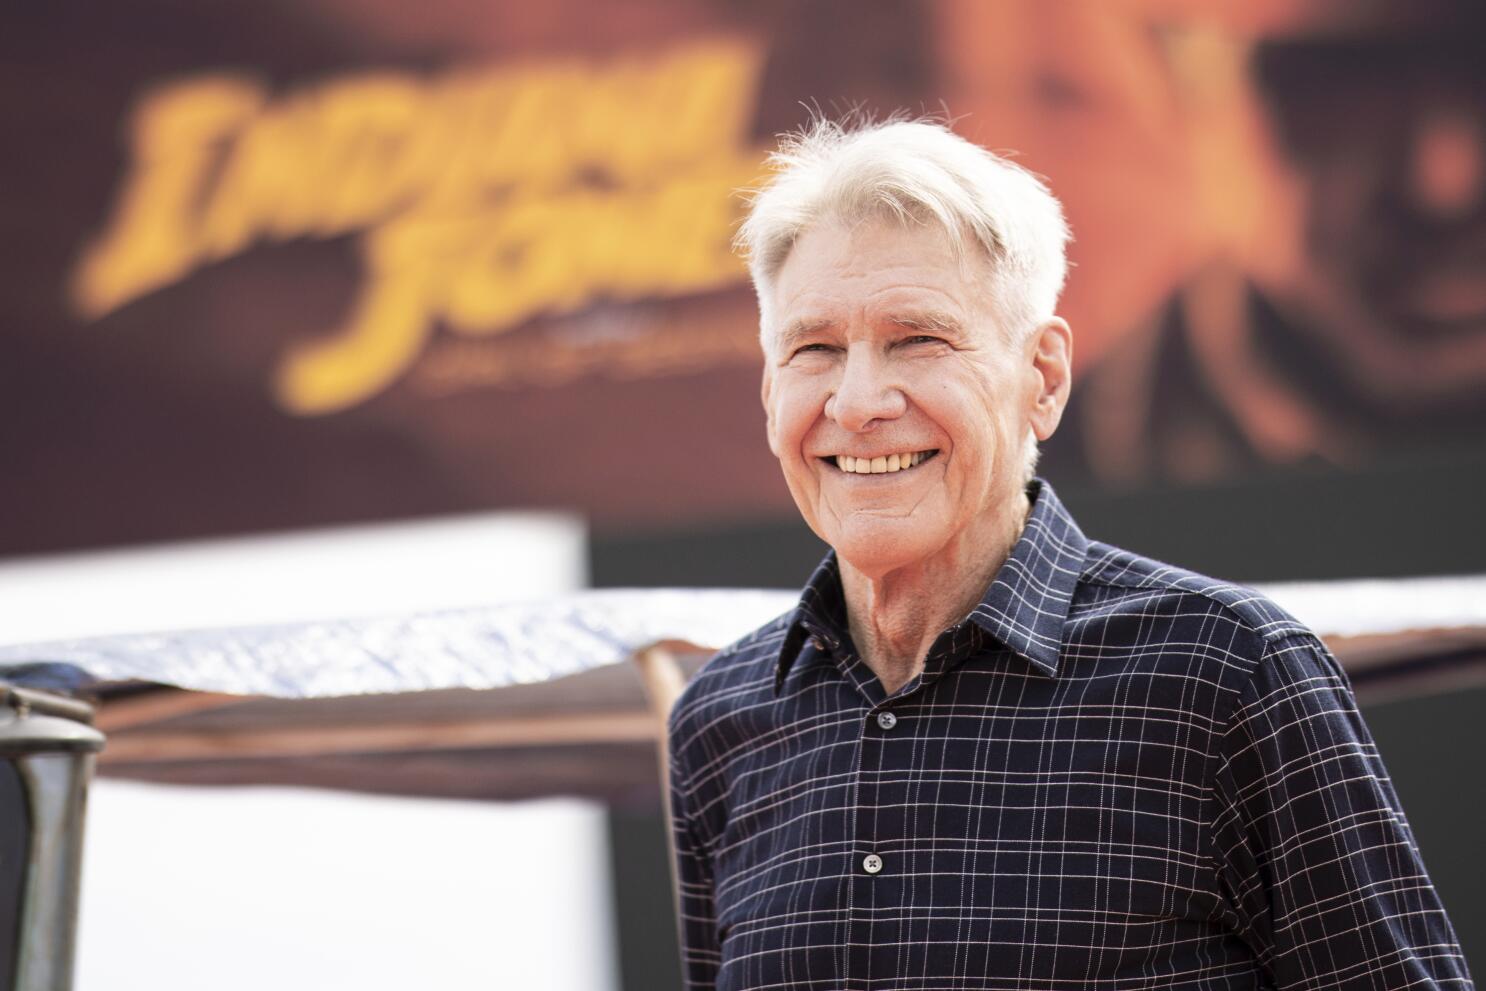 Cannes 2023: Harrison Ford's 'Indiana Jones 5' gets five-minute